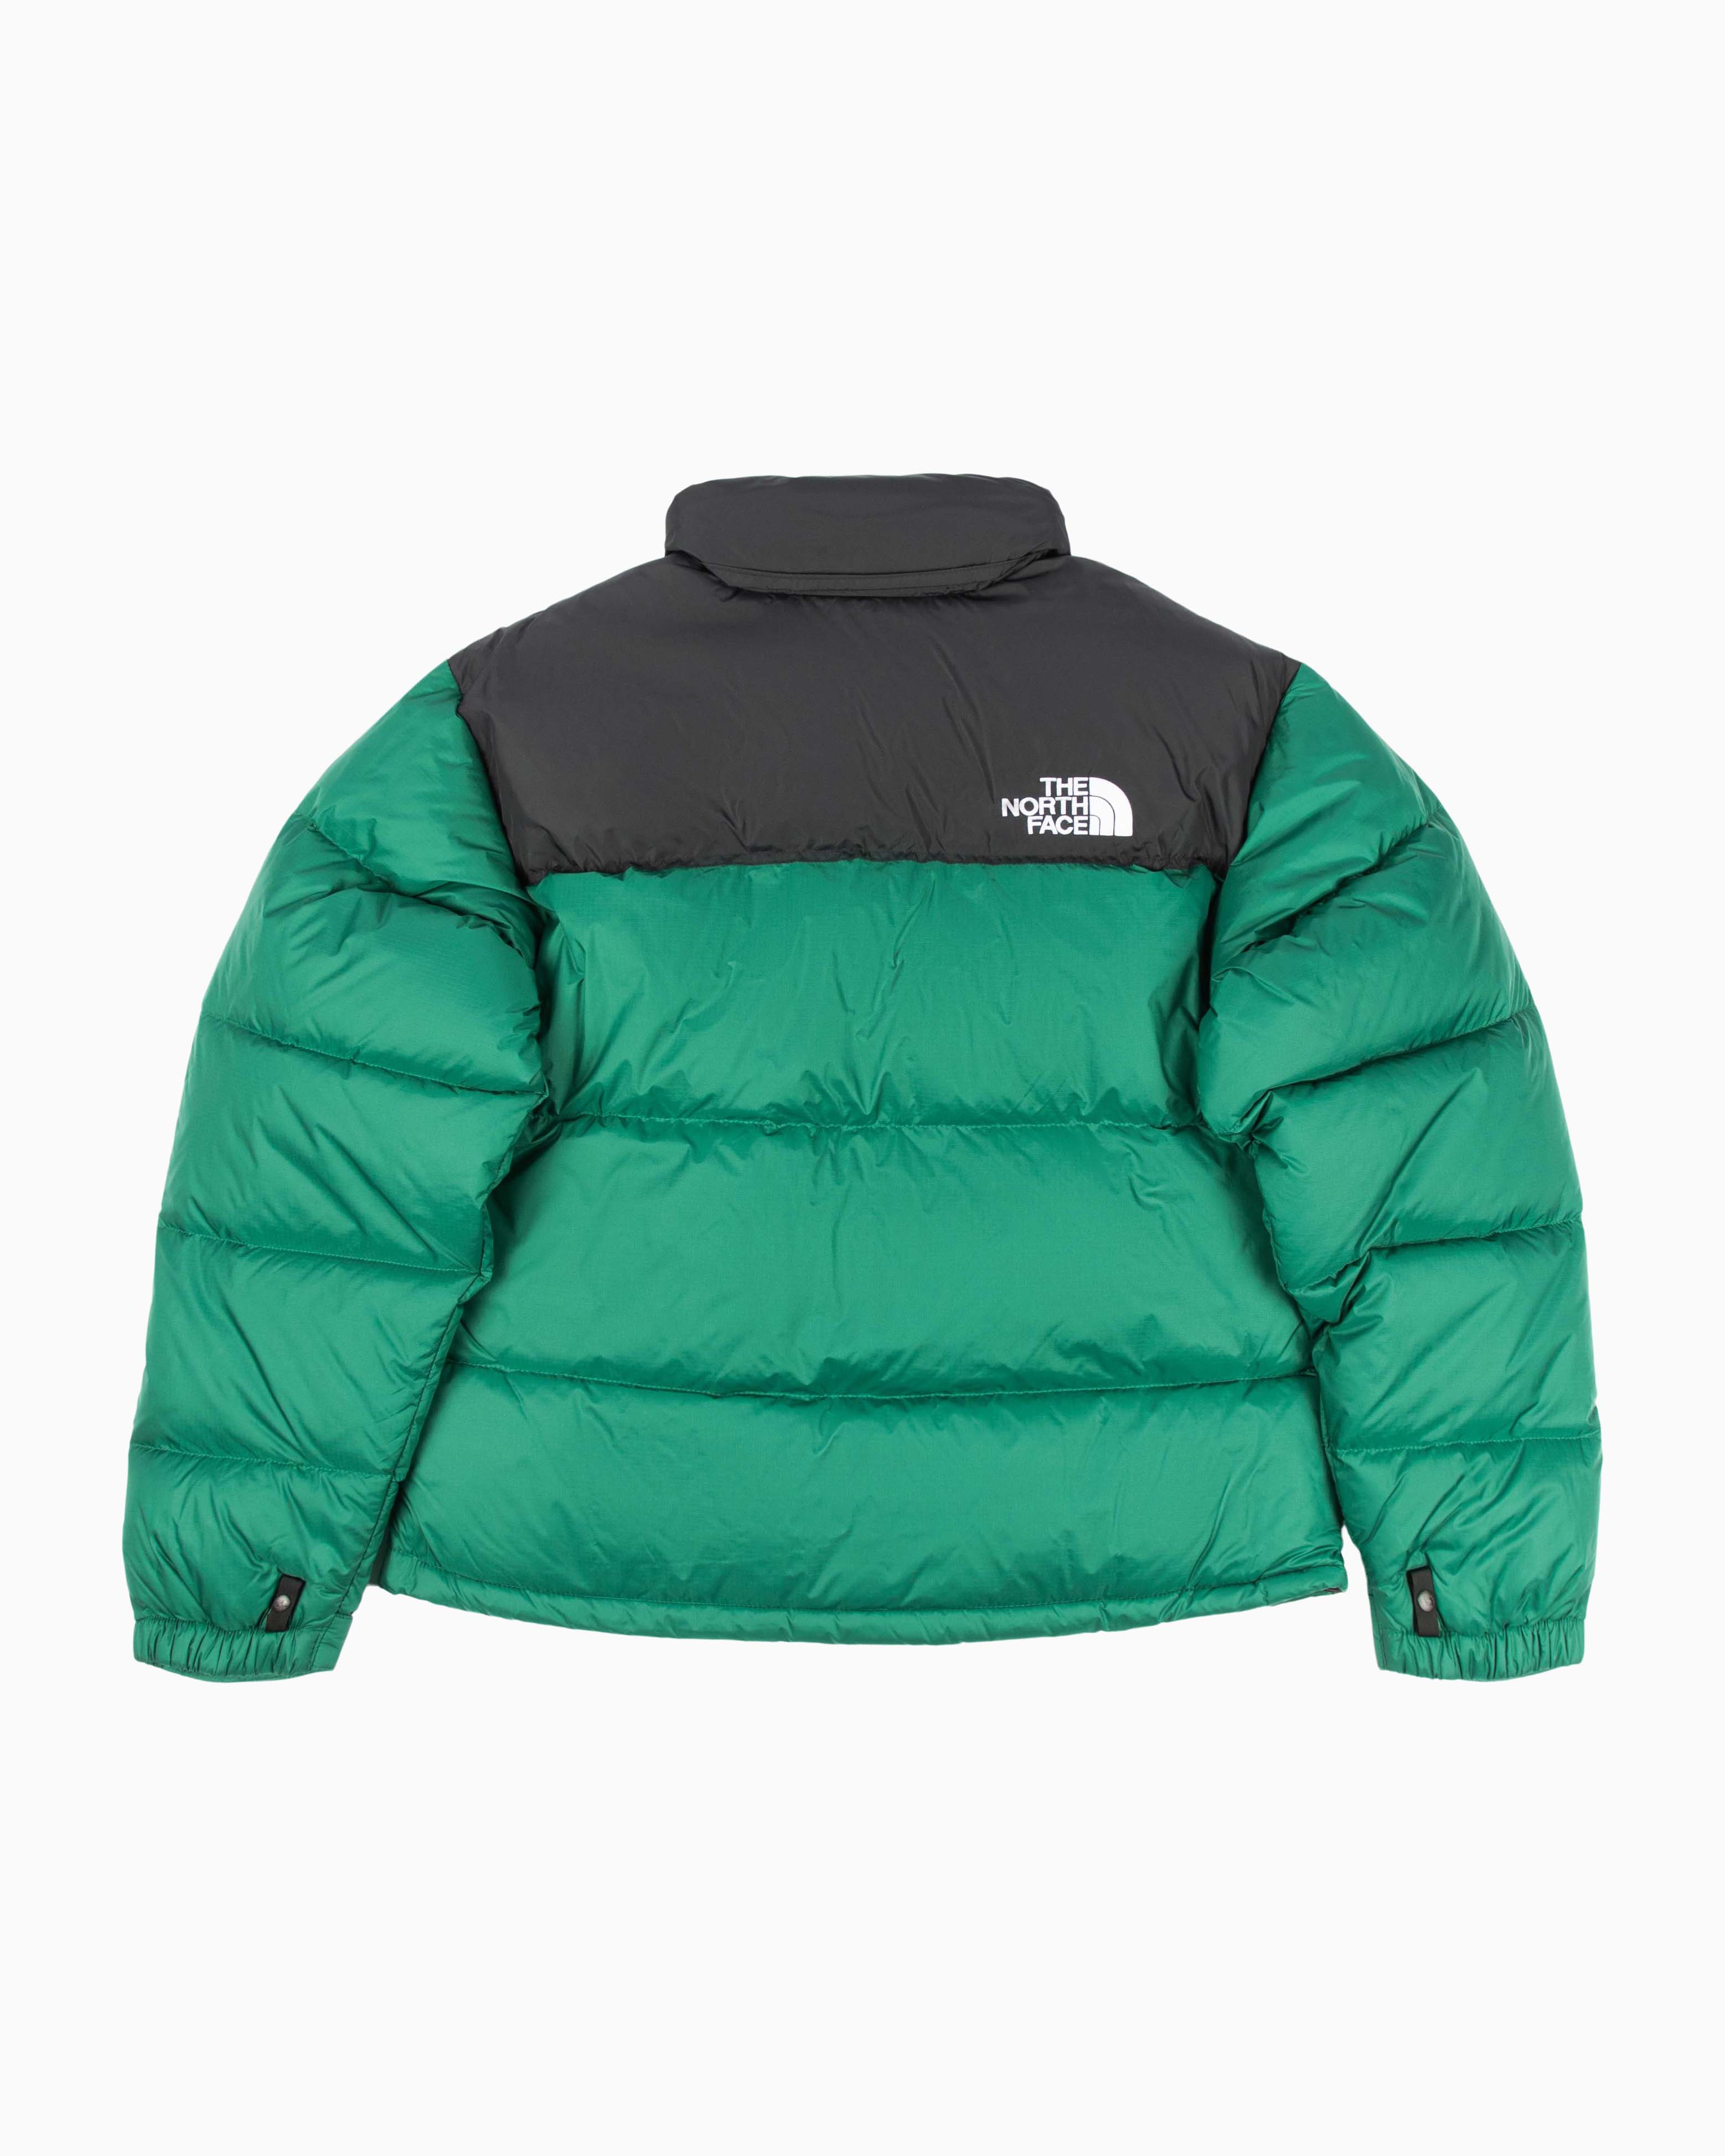 M 1996 Retro Nuptse Jacket The North Face Outerwear Jackets Green